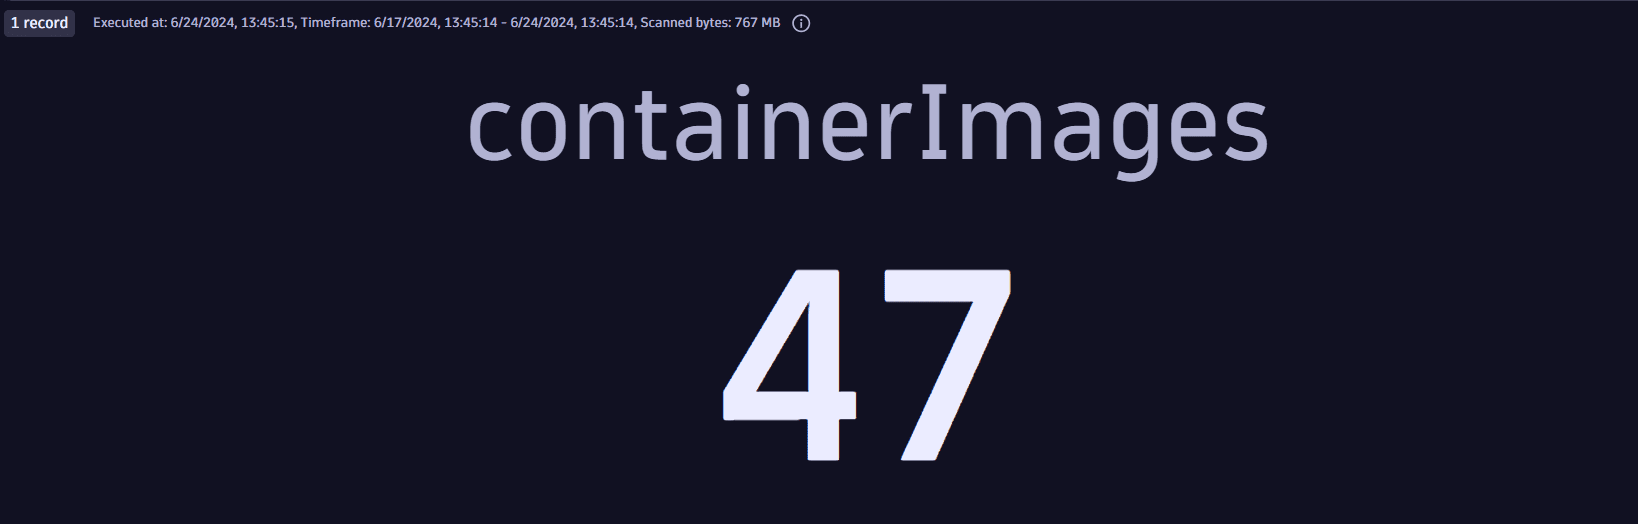 vulnerable container images